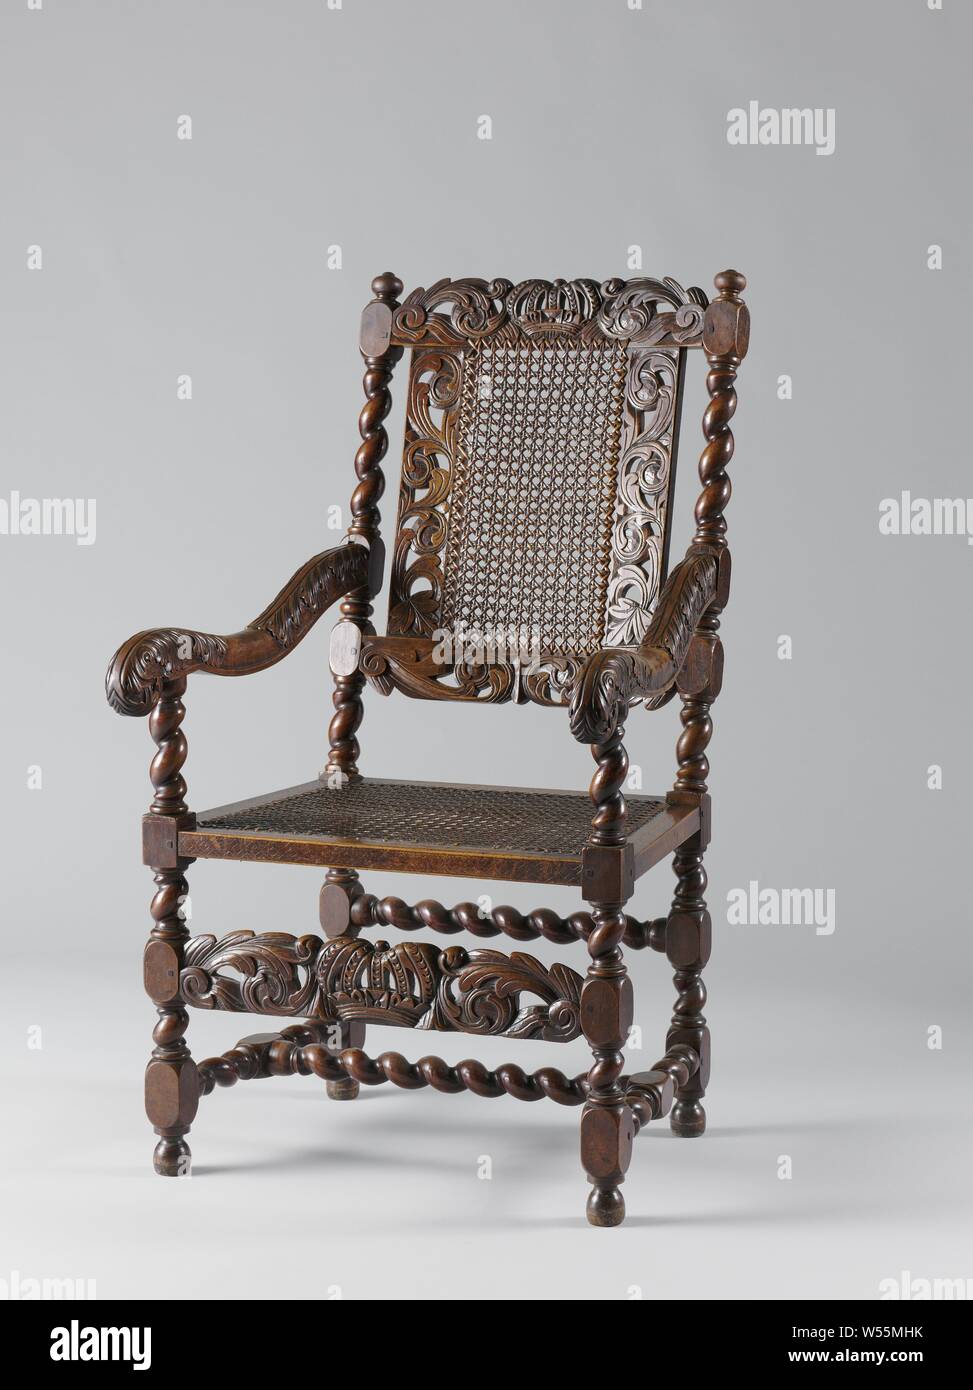 Armchair, covered with cane, back window and front cover cut open with acanthus curls with a royal crown in front cover and top line, Armchair made of walnut. The furniture is covered with reed and has hinged legs, which are connected by an H-shaped window. The armrests rest on slung armrest struts, are hollowed and end in a volute, decorated with acanthus leaves. The freestanding corner posts are hurled. The back window and the foreport show openwork acanthus curls with a royal crown in the middle in the upper line and in the front. A band of diamond braiding is engraved in the seat frame Stock Photo